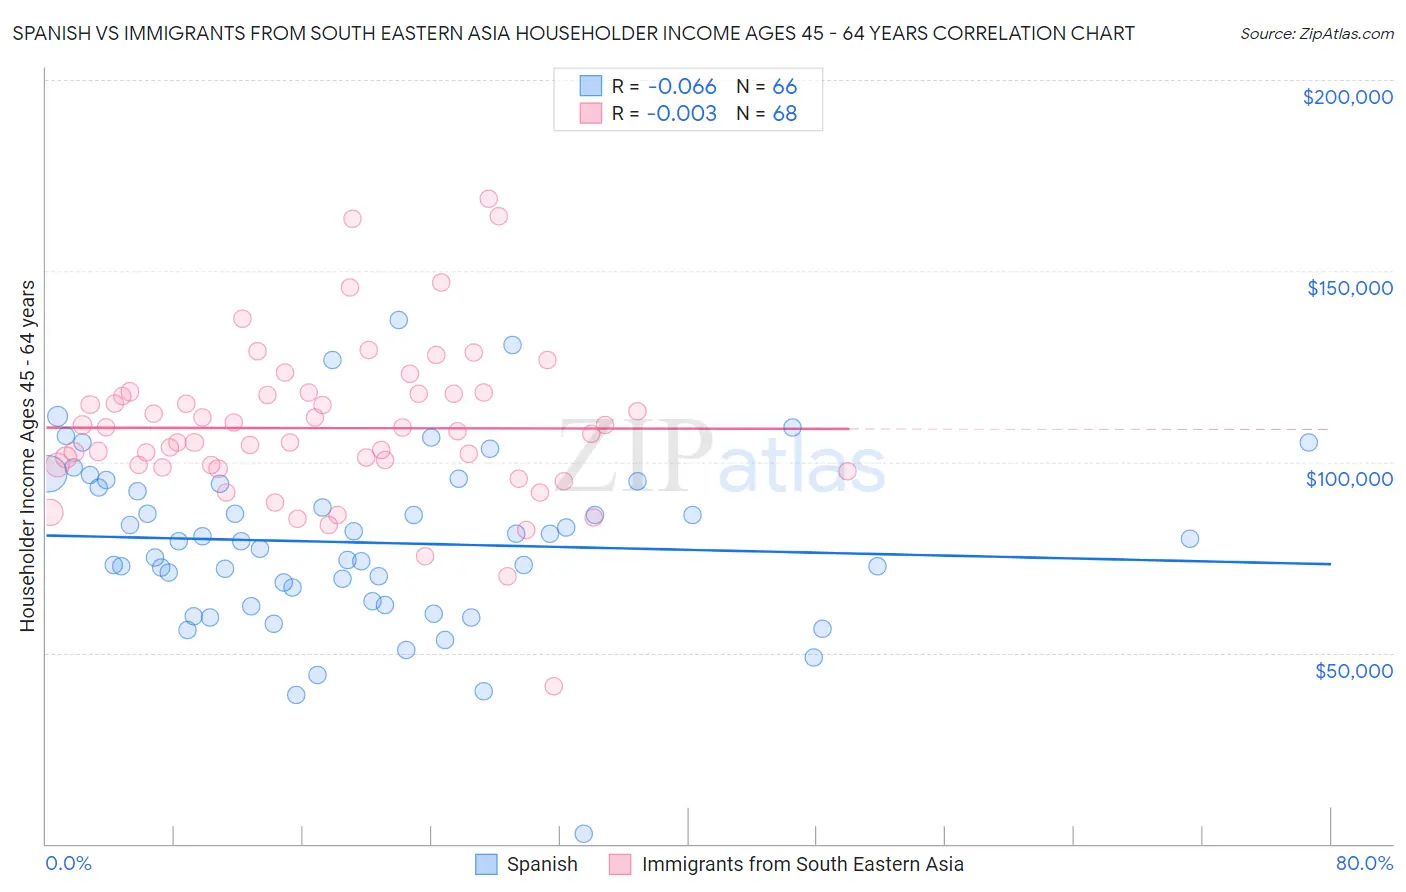 Spanish vs Immigrants from South Eastern Asia Householder Income Ages 45 - 64 years